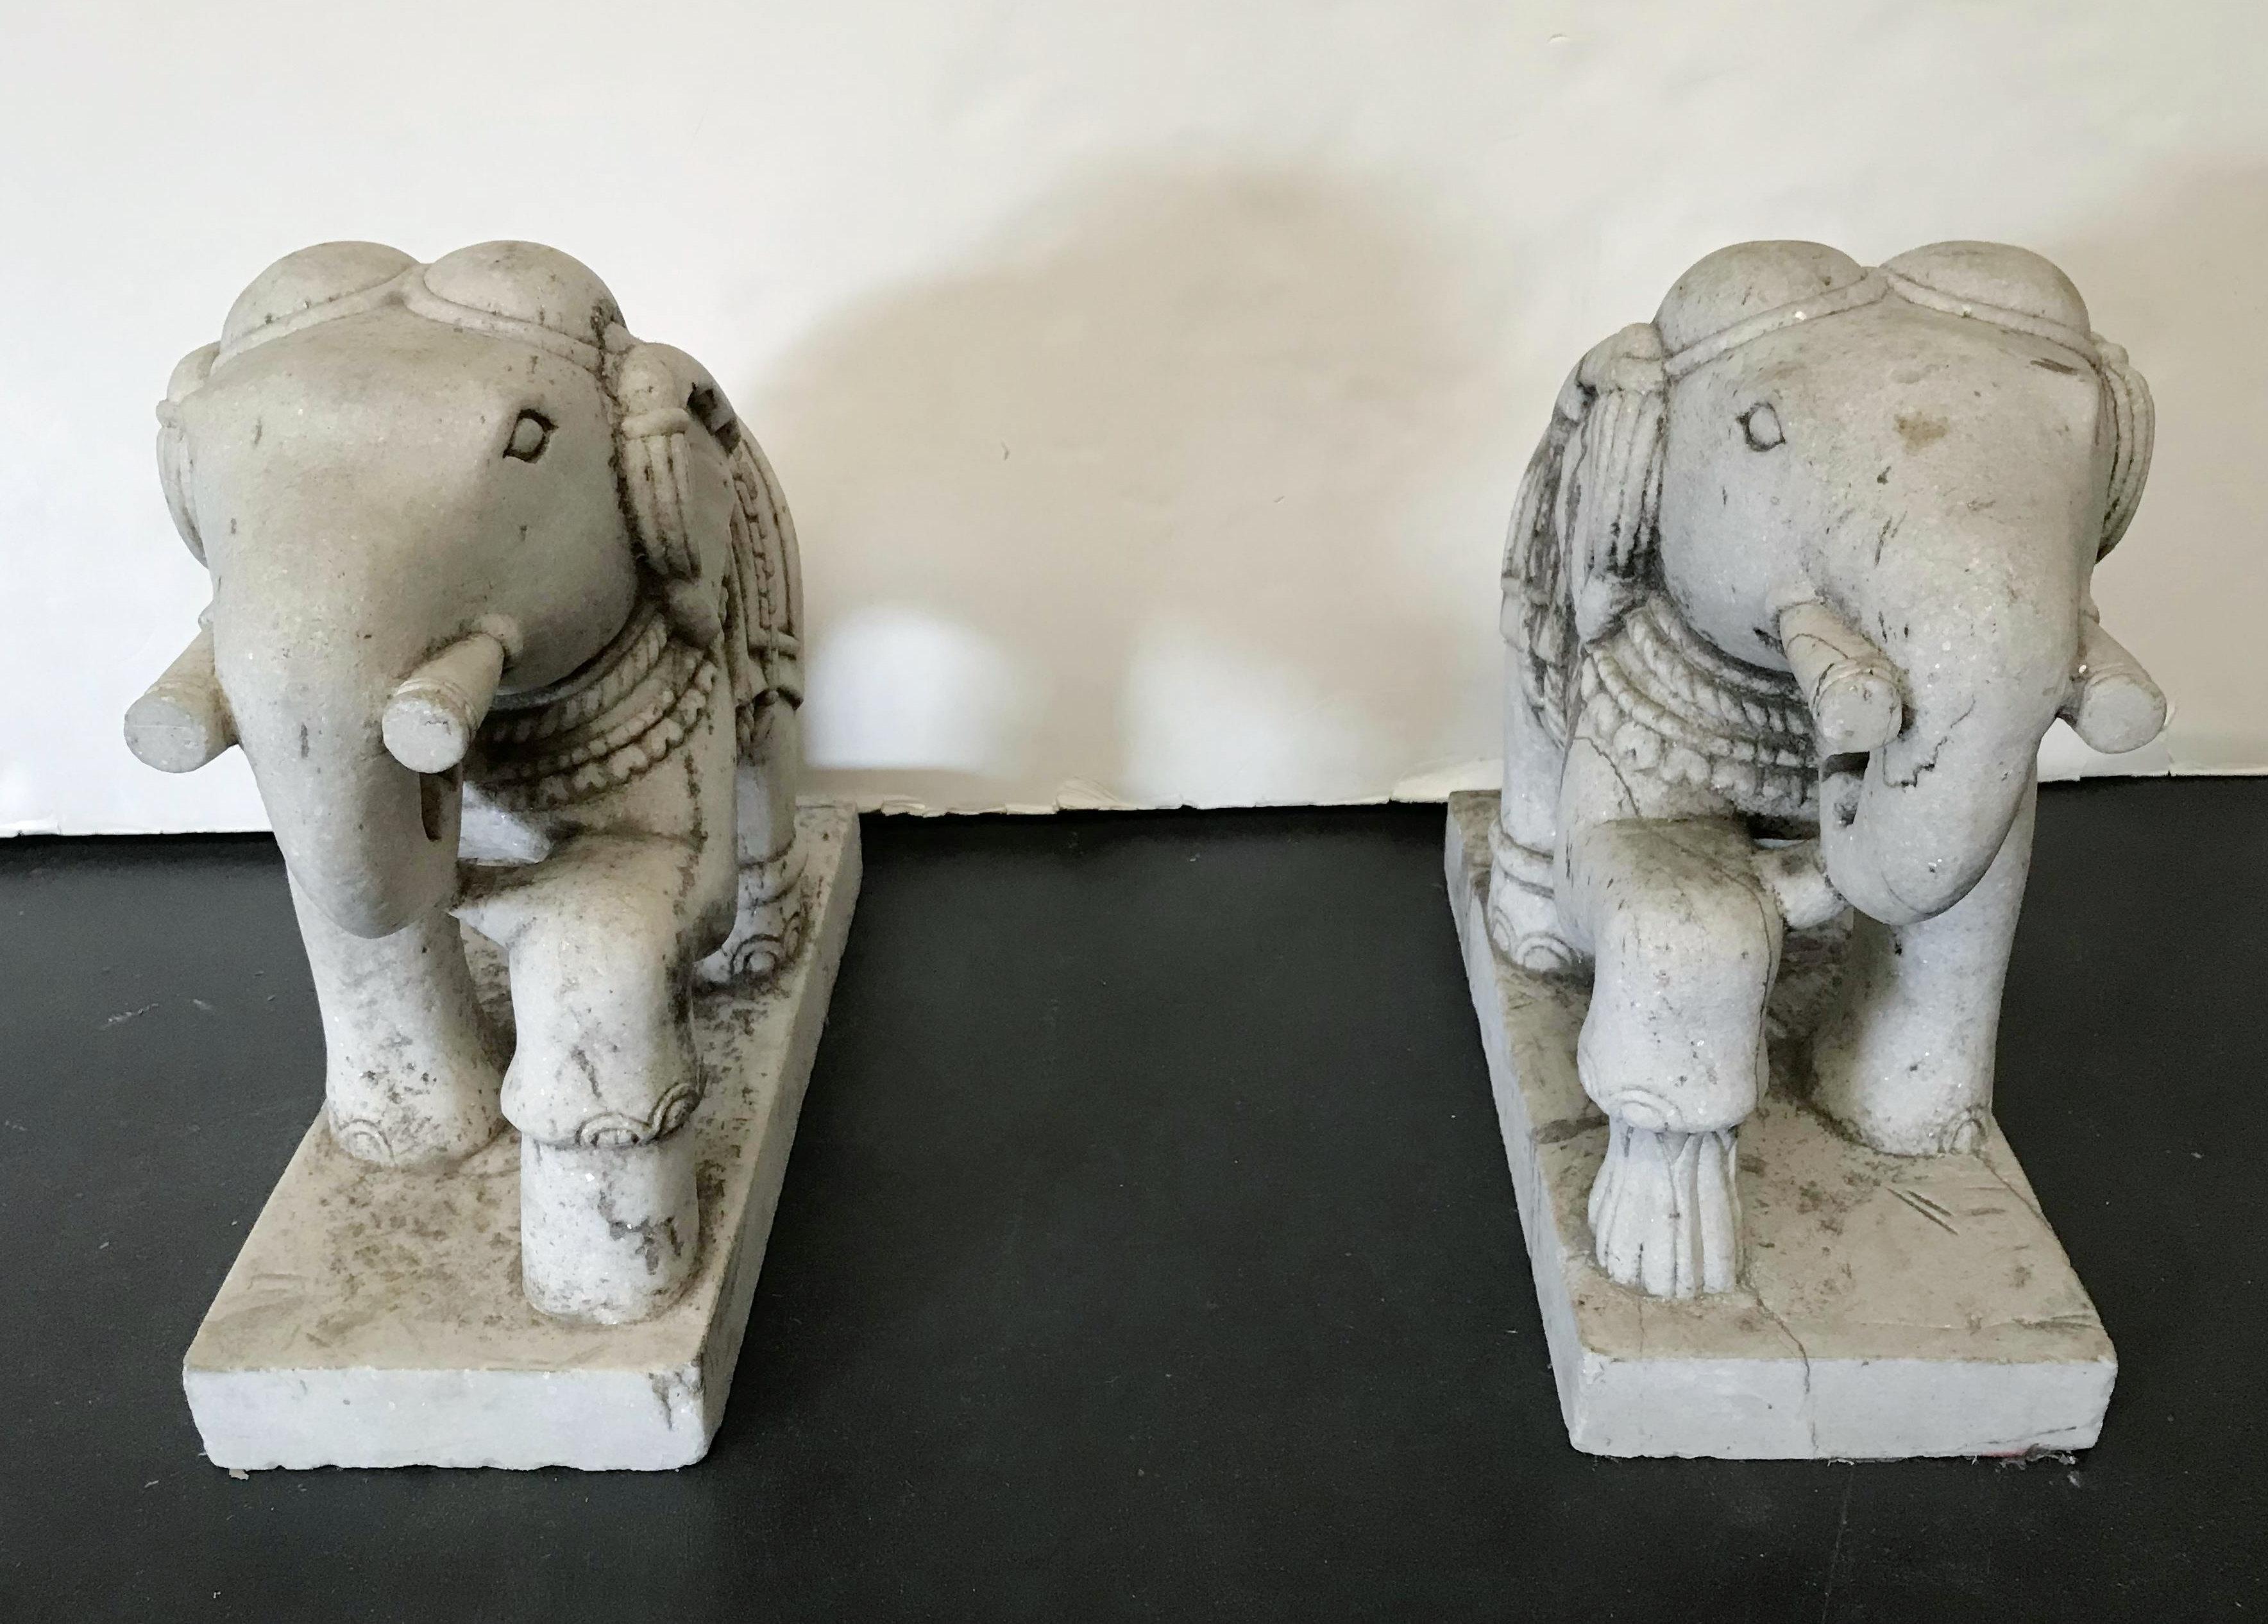 Pair of hand carved stone elephants, made in Italy, circa 1930s
Measures: height 17 inches, width 8 inches, depth 17 inches
Pair in stock in Los Angeles
Order reference #: FABIOLTD F196